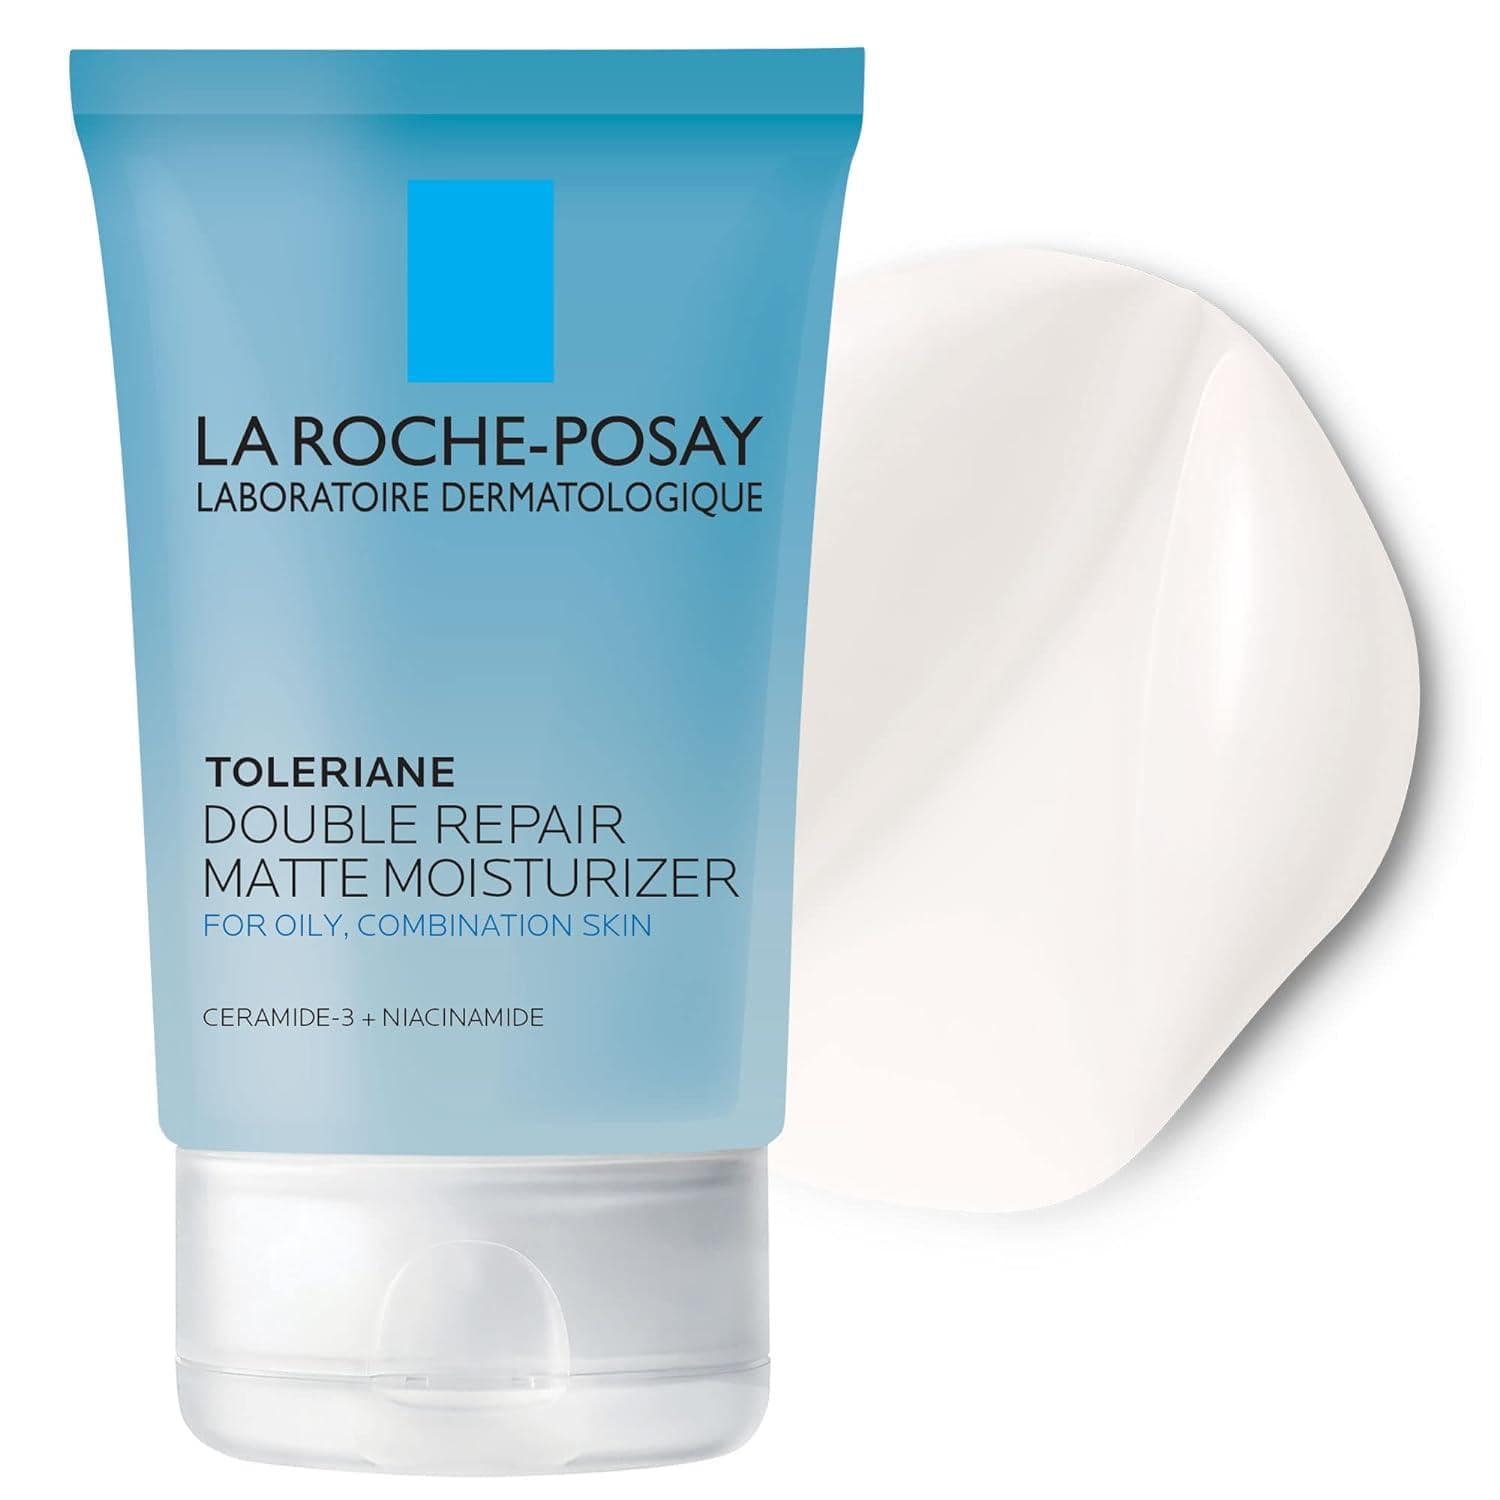 La Roche Posay's Toleriane Double Repair Matte Moisturizer stands out, flawlessly hydrating while keeping shine at bay with its gel-cream formula enriched with thermal water, ceramides, niacinamide, and glycerin.